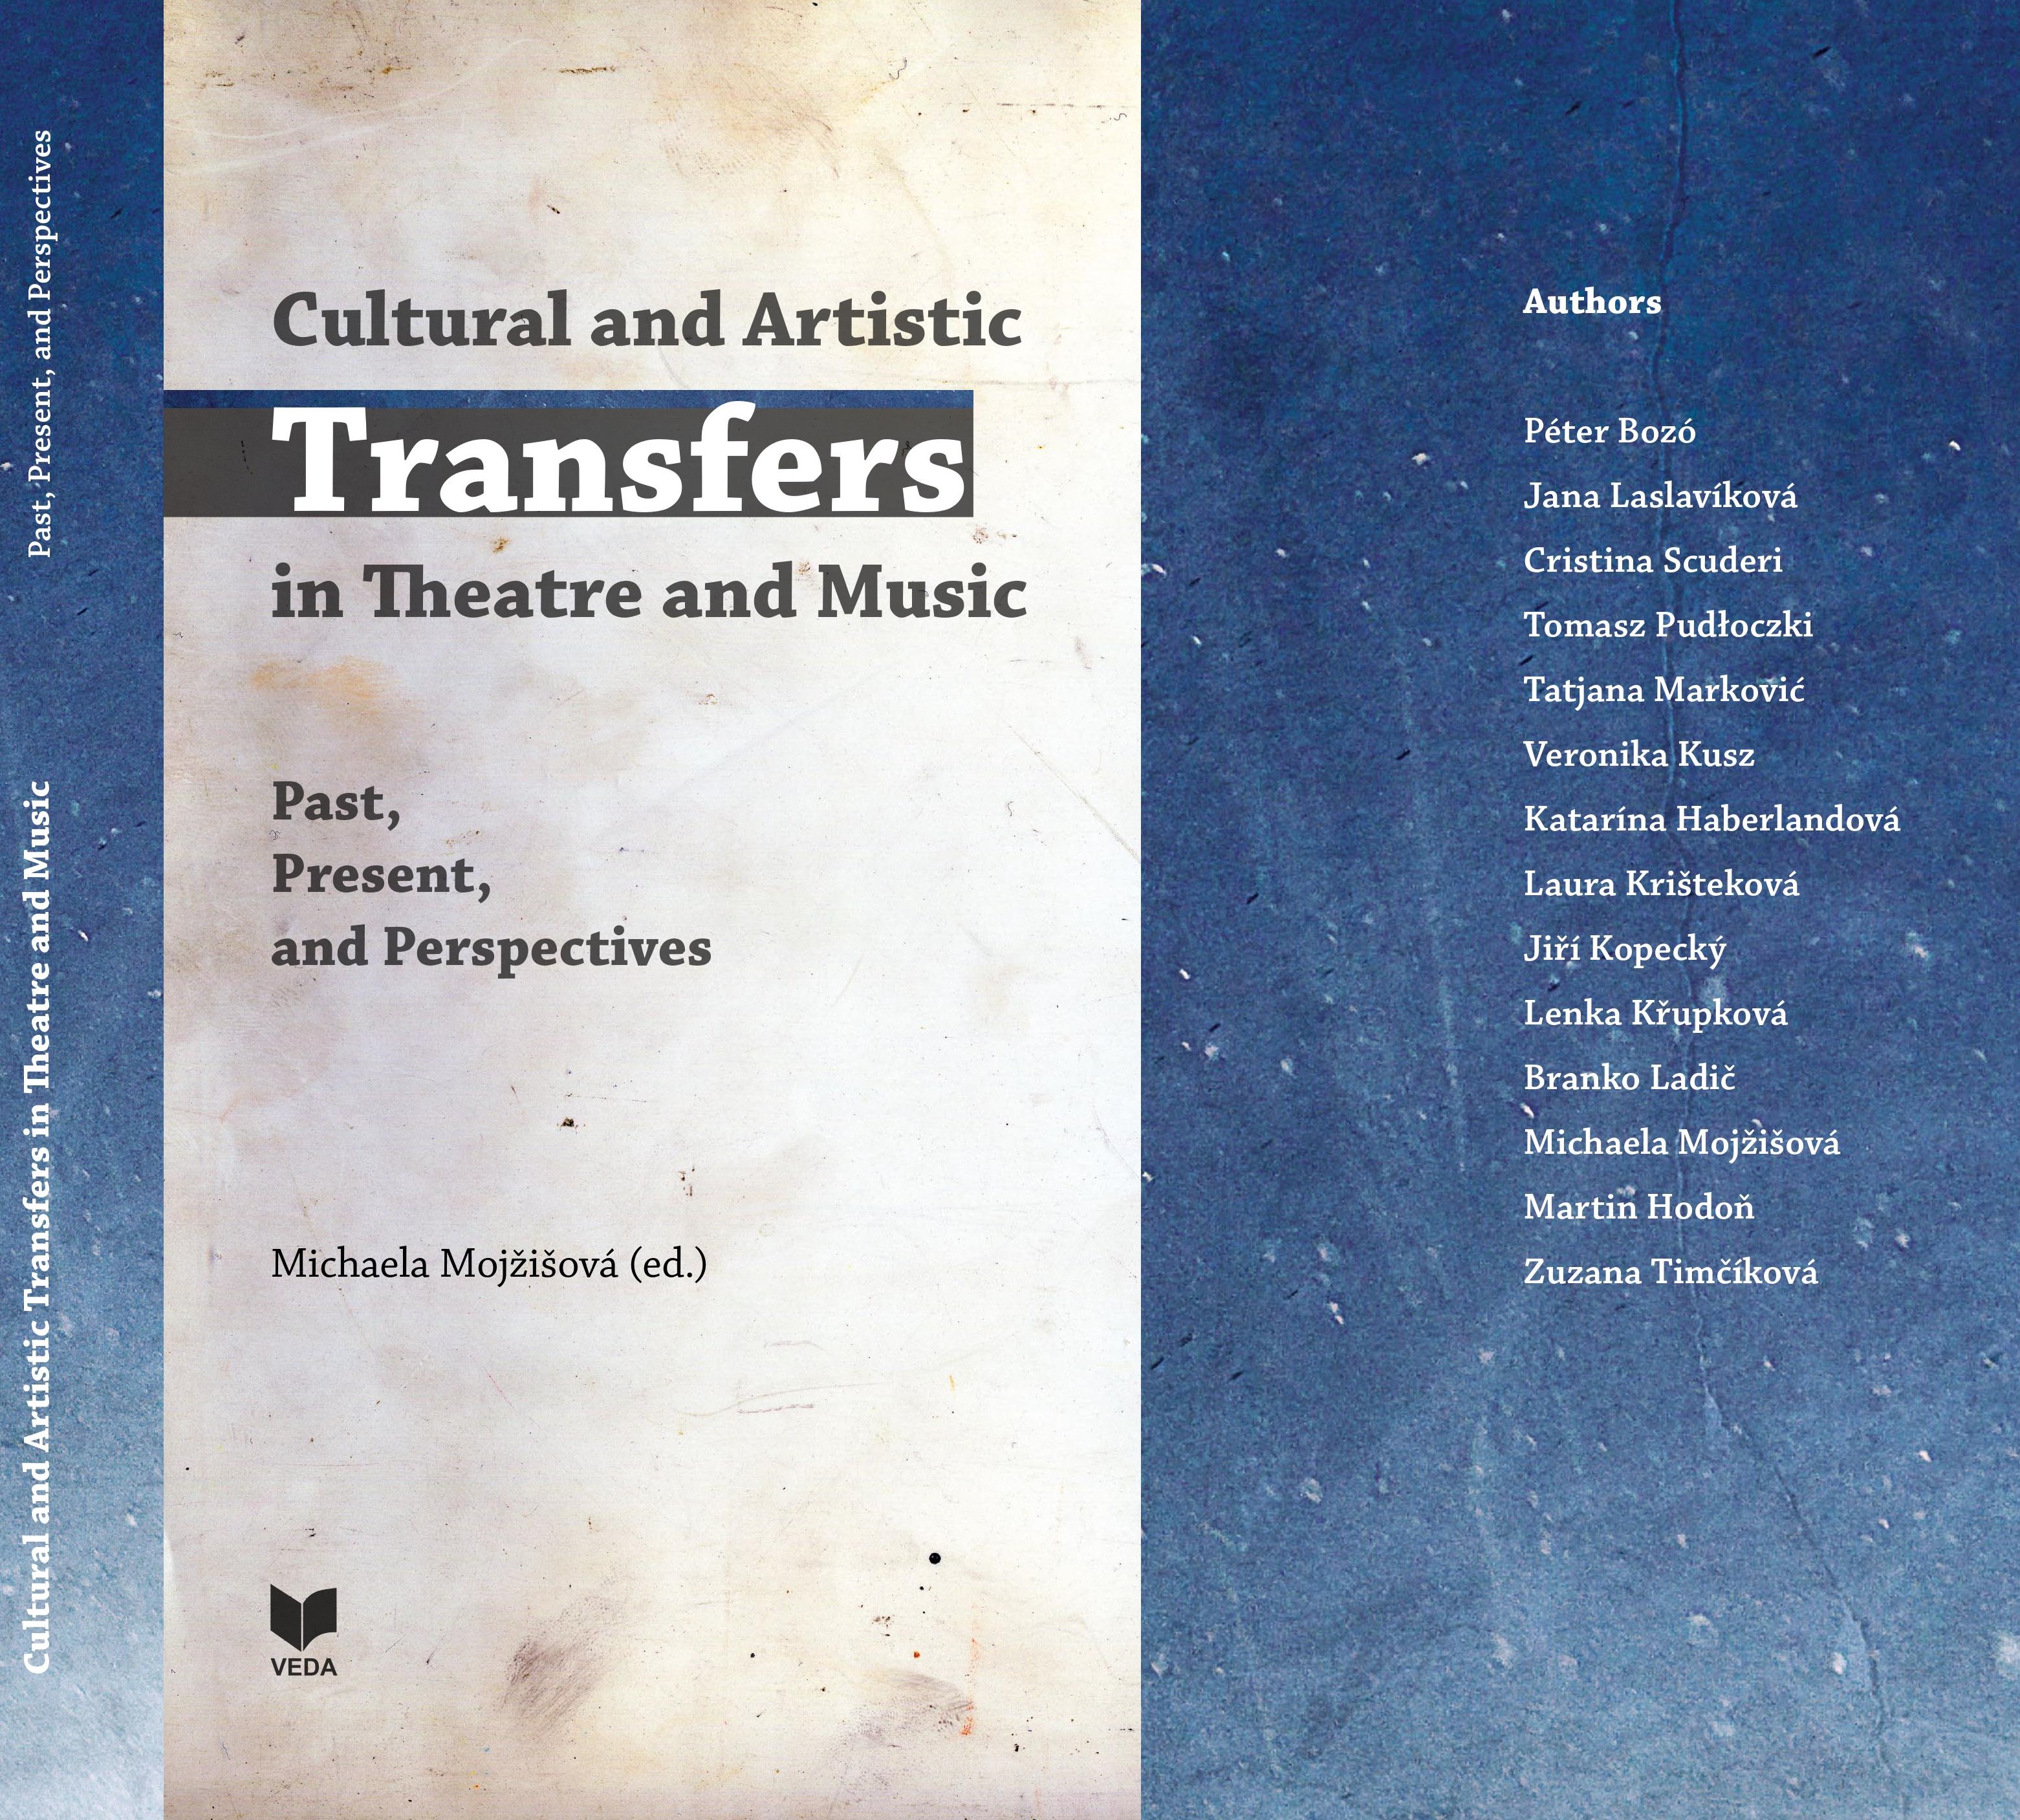 Cultural and Artistic Transfers  in Theatre and Music: Past, Present, and Perspectives